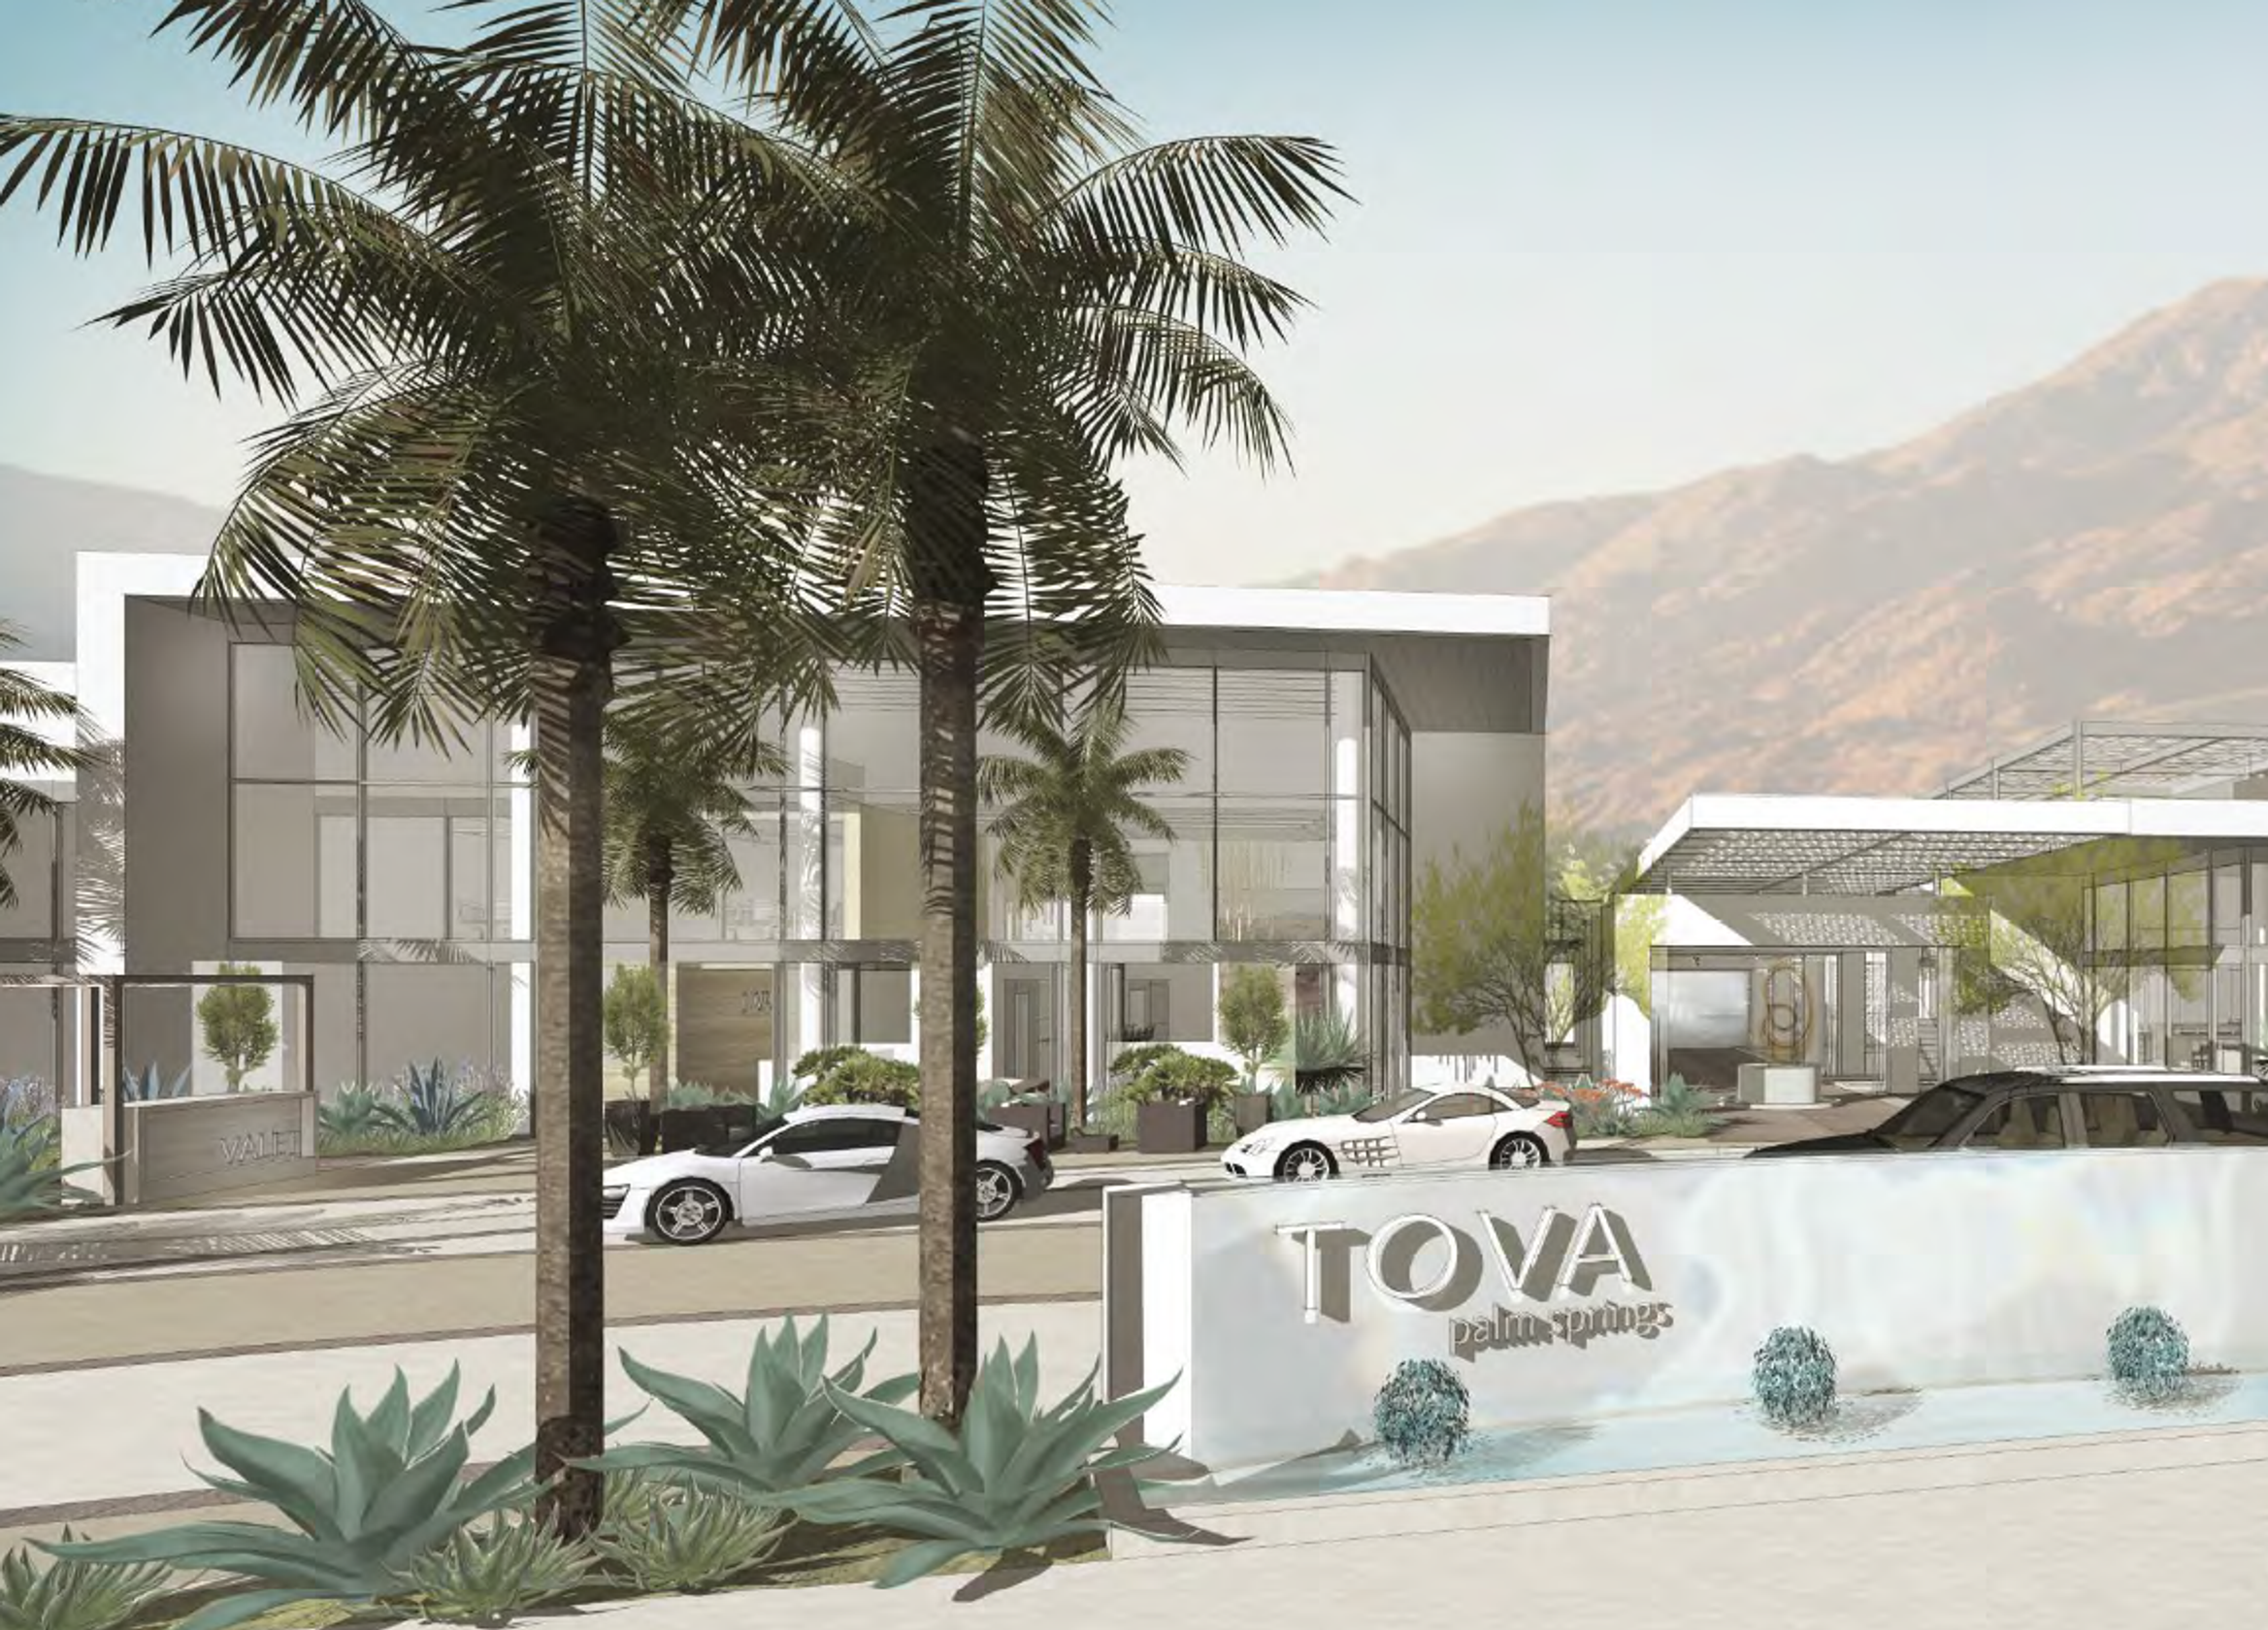 Shopoff Completes Bridge Loan for Palm Springs Hotel Redevelopment Project